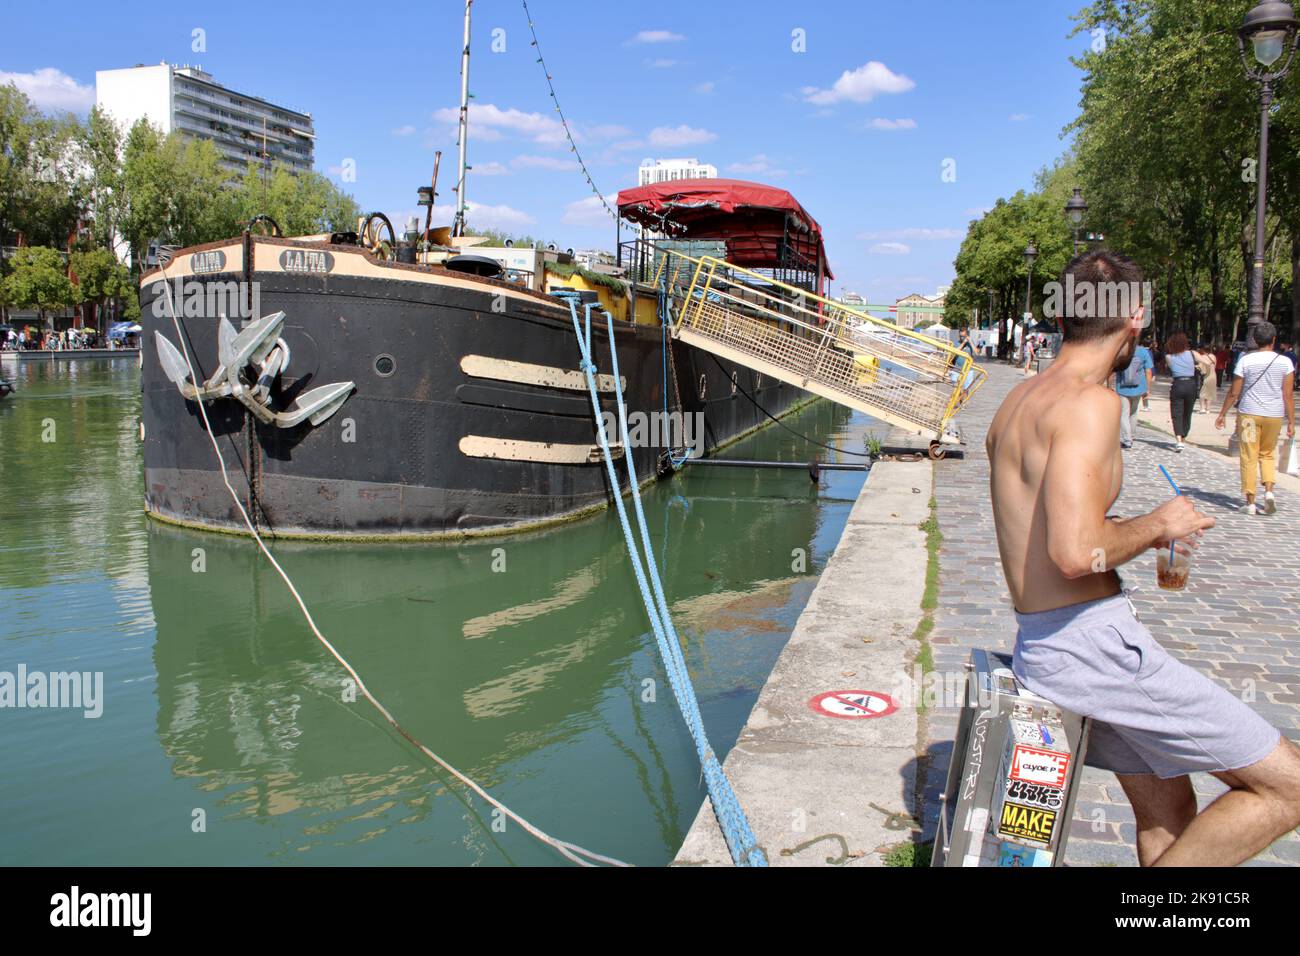 View of a boat and people relaxing along the Bassin de la Villette at Paris-Plage in the 19th arrondissement of Paris France. Stock Photo